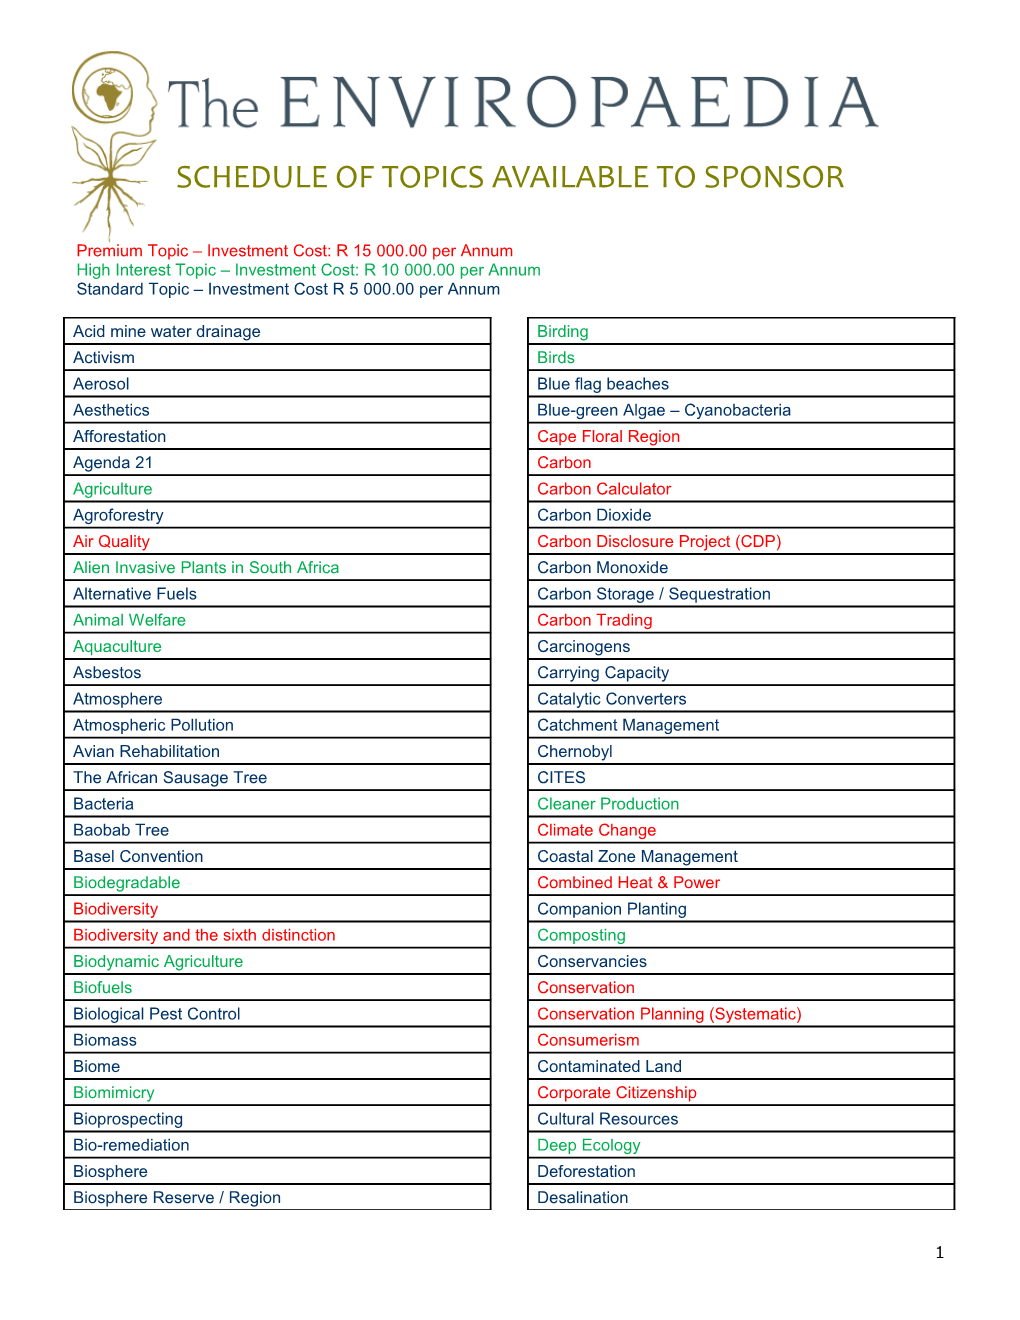 Schedule of Topics Available to Sponsor